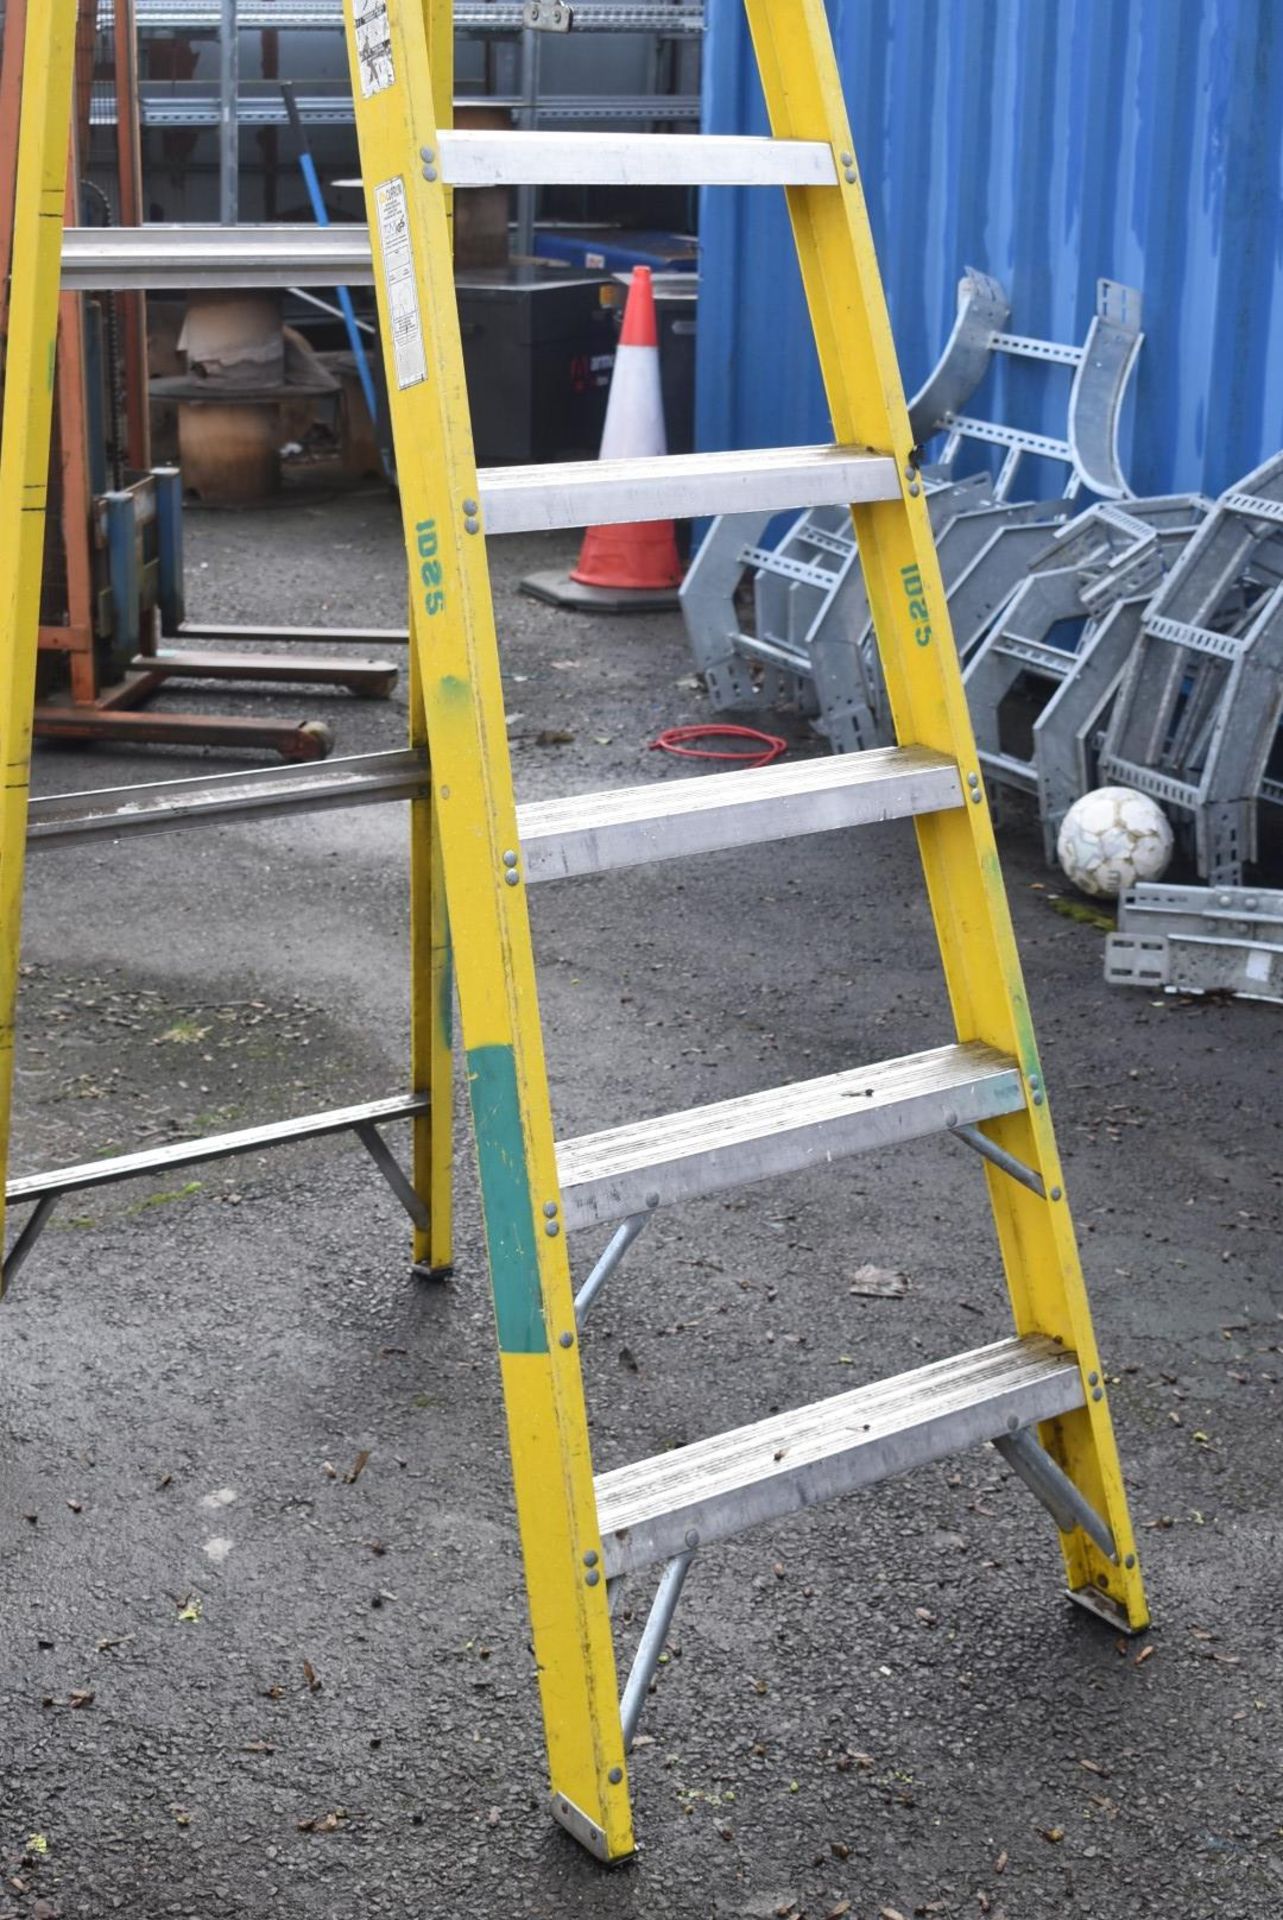 1 x Fibreglass Site Ladder With 9 Treads - Suitable For Working Around Thermal or Electrical Dangers - Image 7 of 9